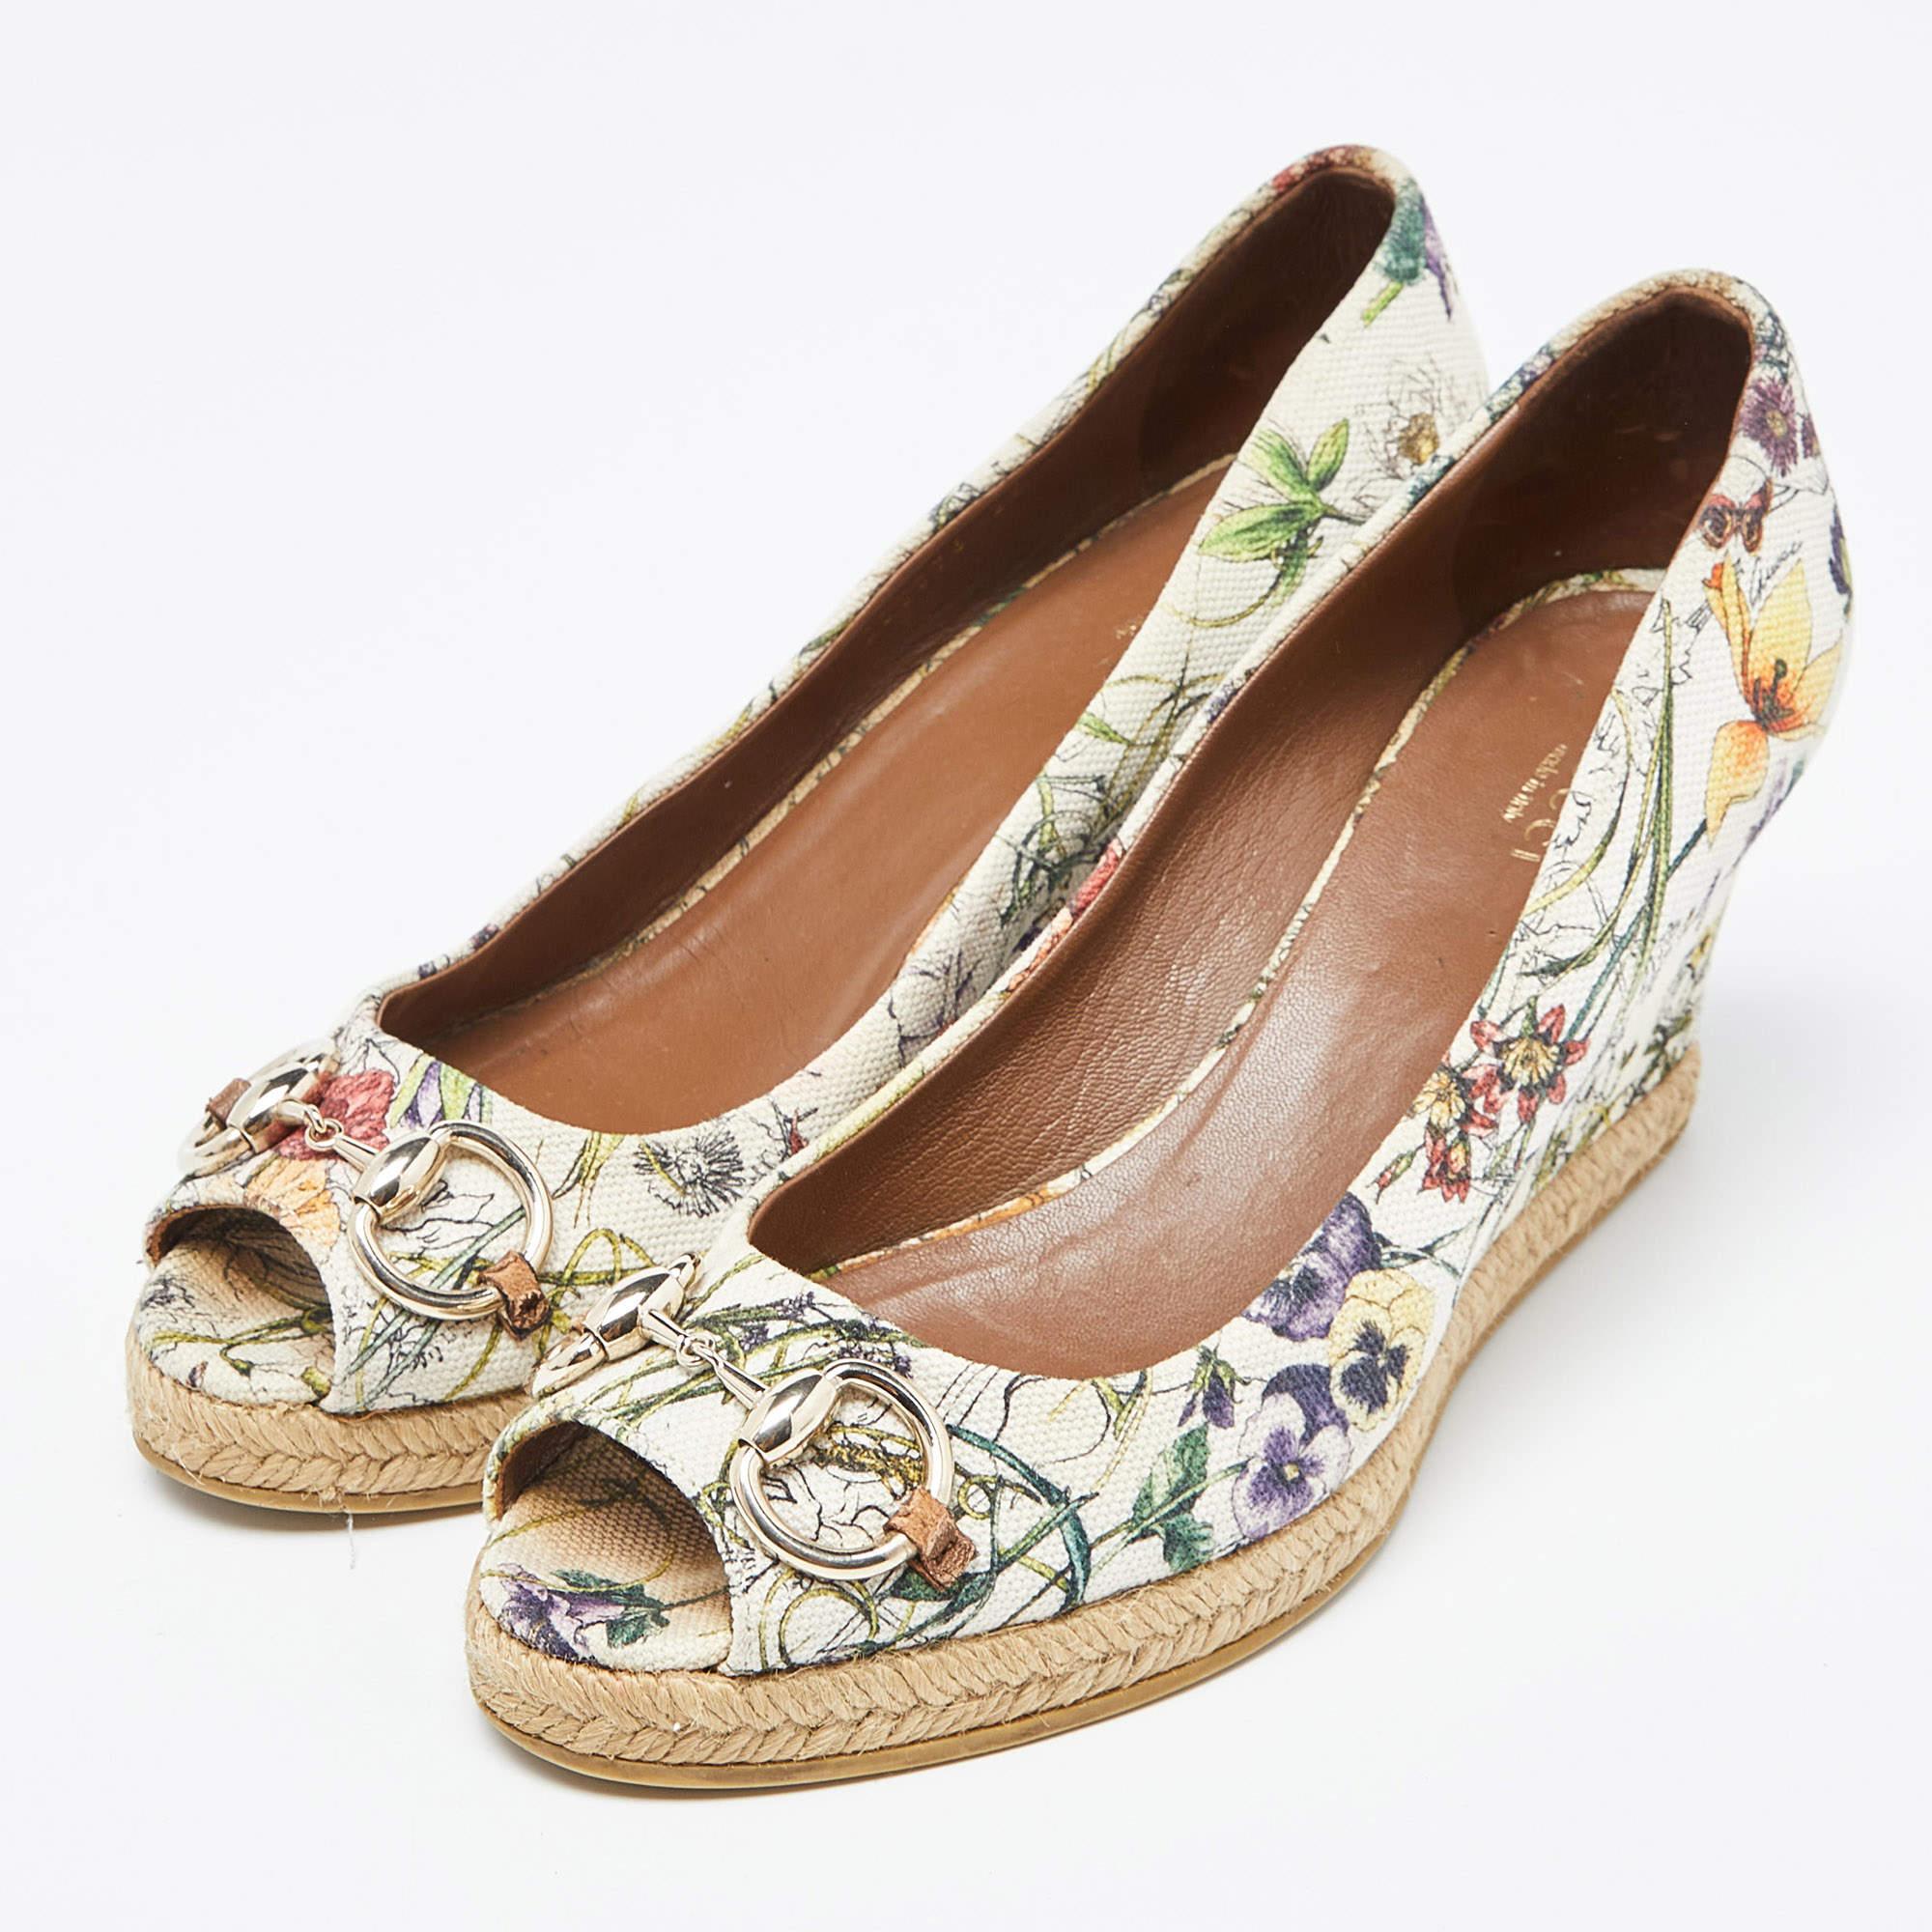 Chic and stylish, these pumps from Gucci definitely need to be on your wishlist! They are crafted from floral printed canvas and feature a peep-toe silhouette. They flaunt the iconic Horsebit detail on the uppers, 8cm wedge heels, and comfortable